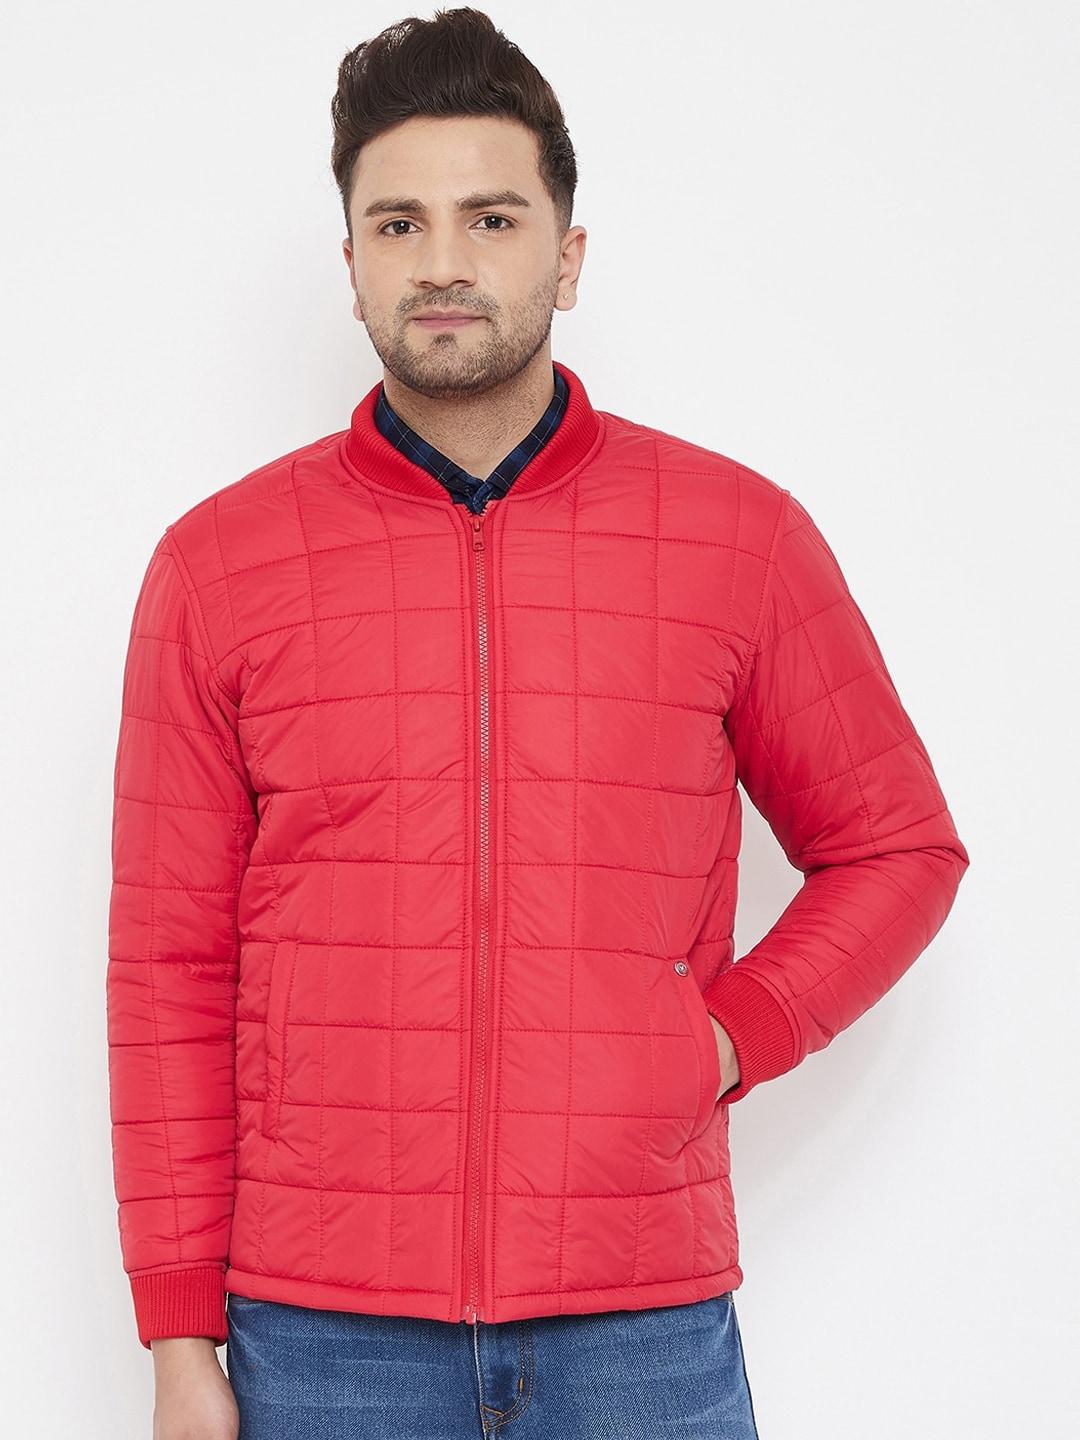 canary-london-men-red-self-design-padded-jacket